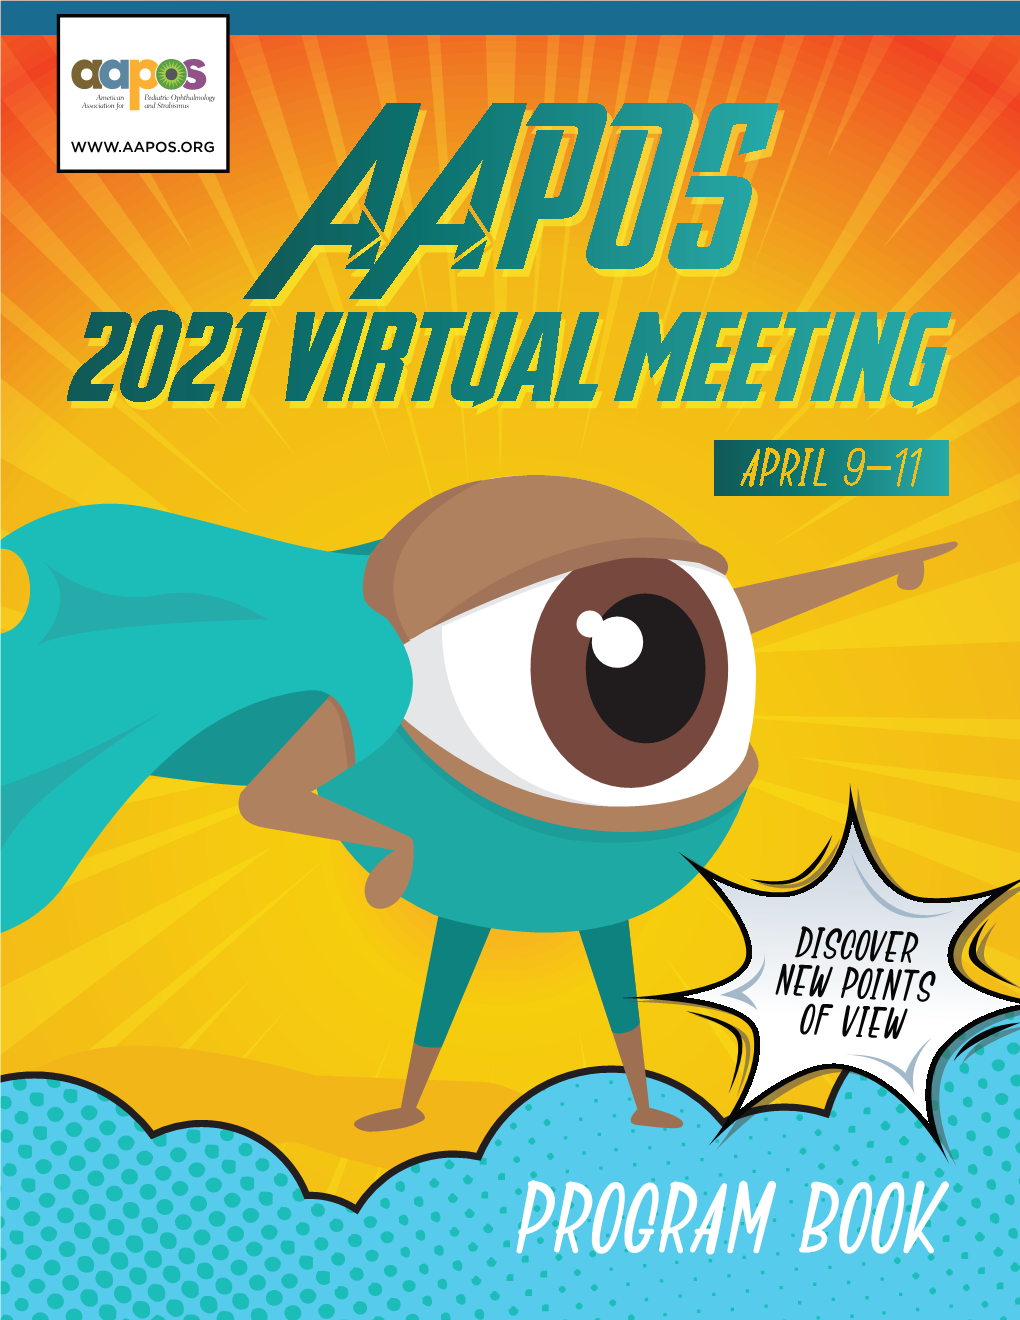 PROGRAM BOOK Welcome! the American Association for Pediatric Ophthalmology and Strabismus (AAPOS) Would Like to Welcome You to Our 46Th Annual Meeting